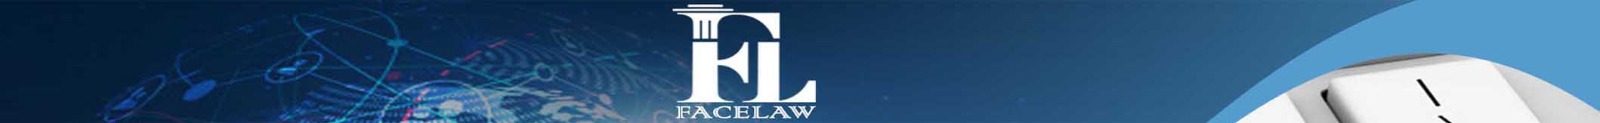 list of lawyers in toronto